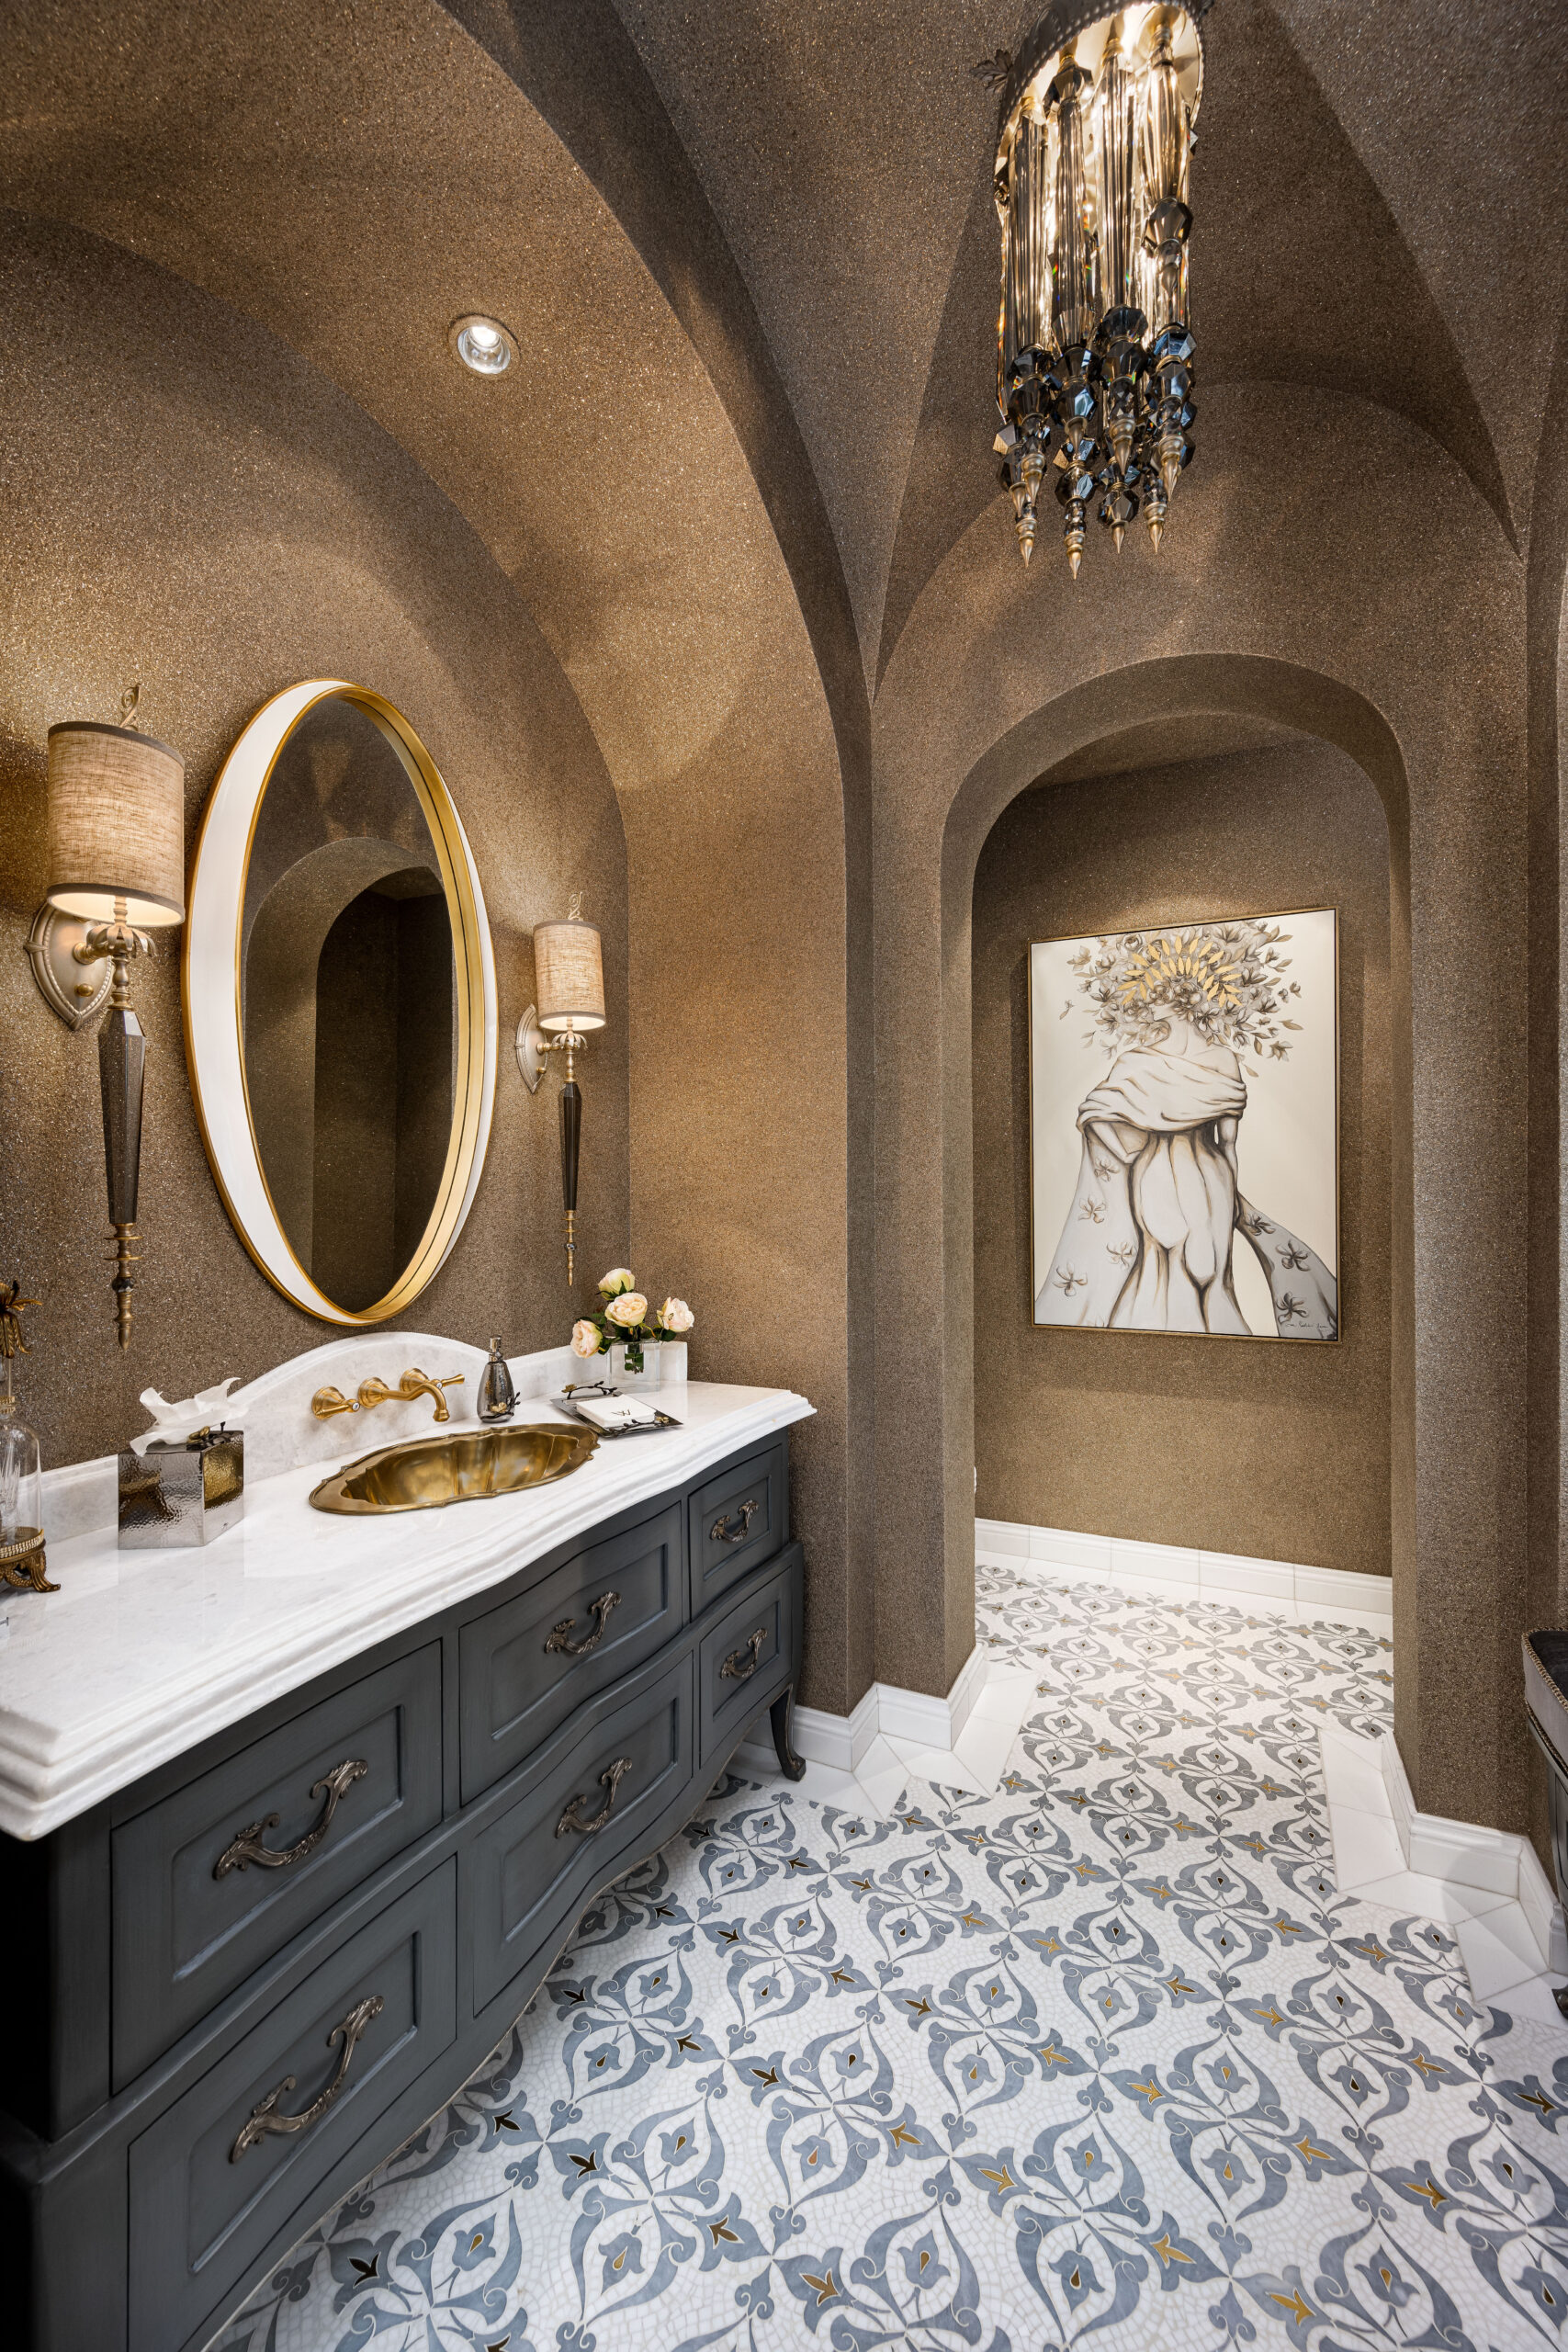 Elegant Bathroom with Gold Accents: A luxurious bathroom with arched ceilings and walls covered in a shimmering gold texture. The vanity features a gold sink with a marble countertop and ornate gold fixtures. A round mirror with a gold frame is flanked by two wall sconces. The floor is tiled with a patterned design, and the space includes a decorative chandelier and artwork.